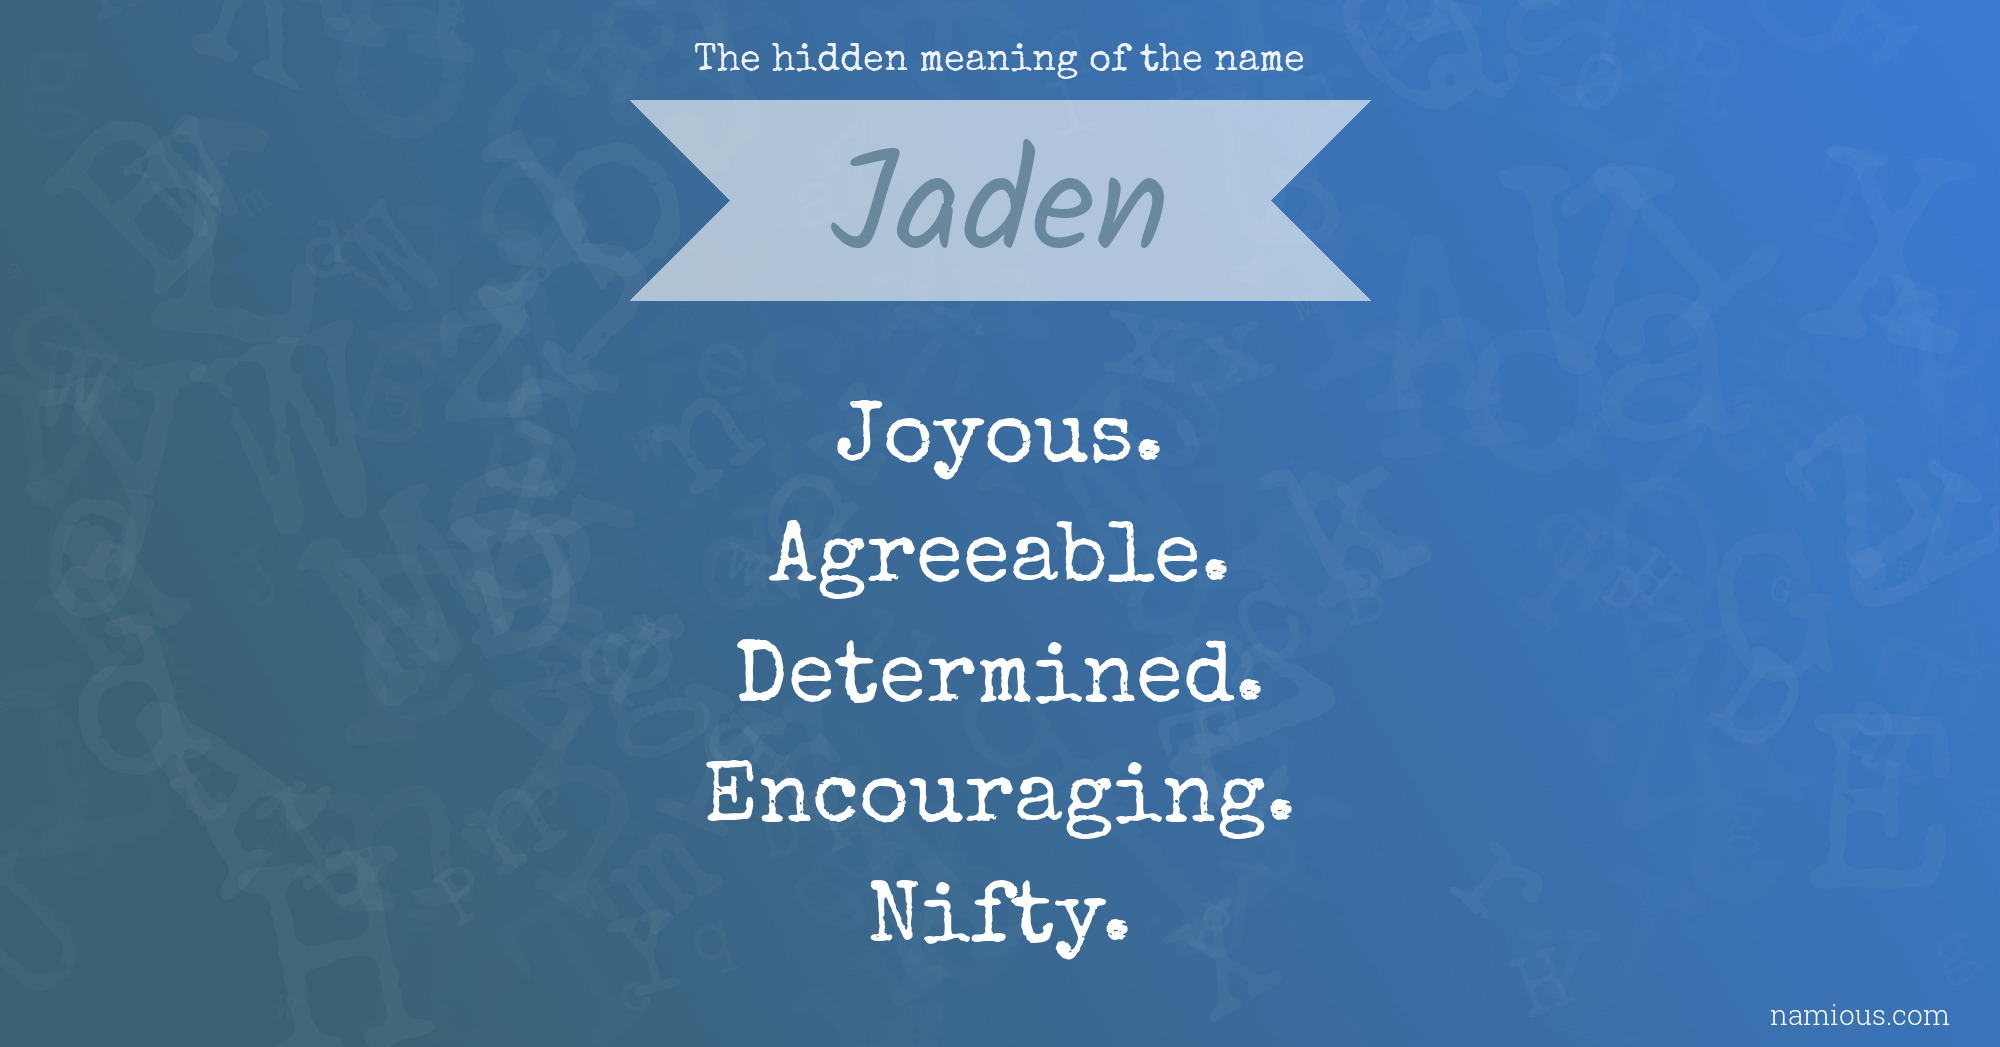 The hidden meaning of the name Jaden